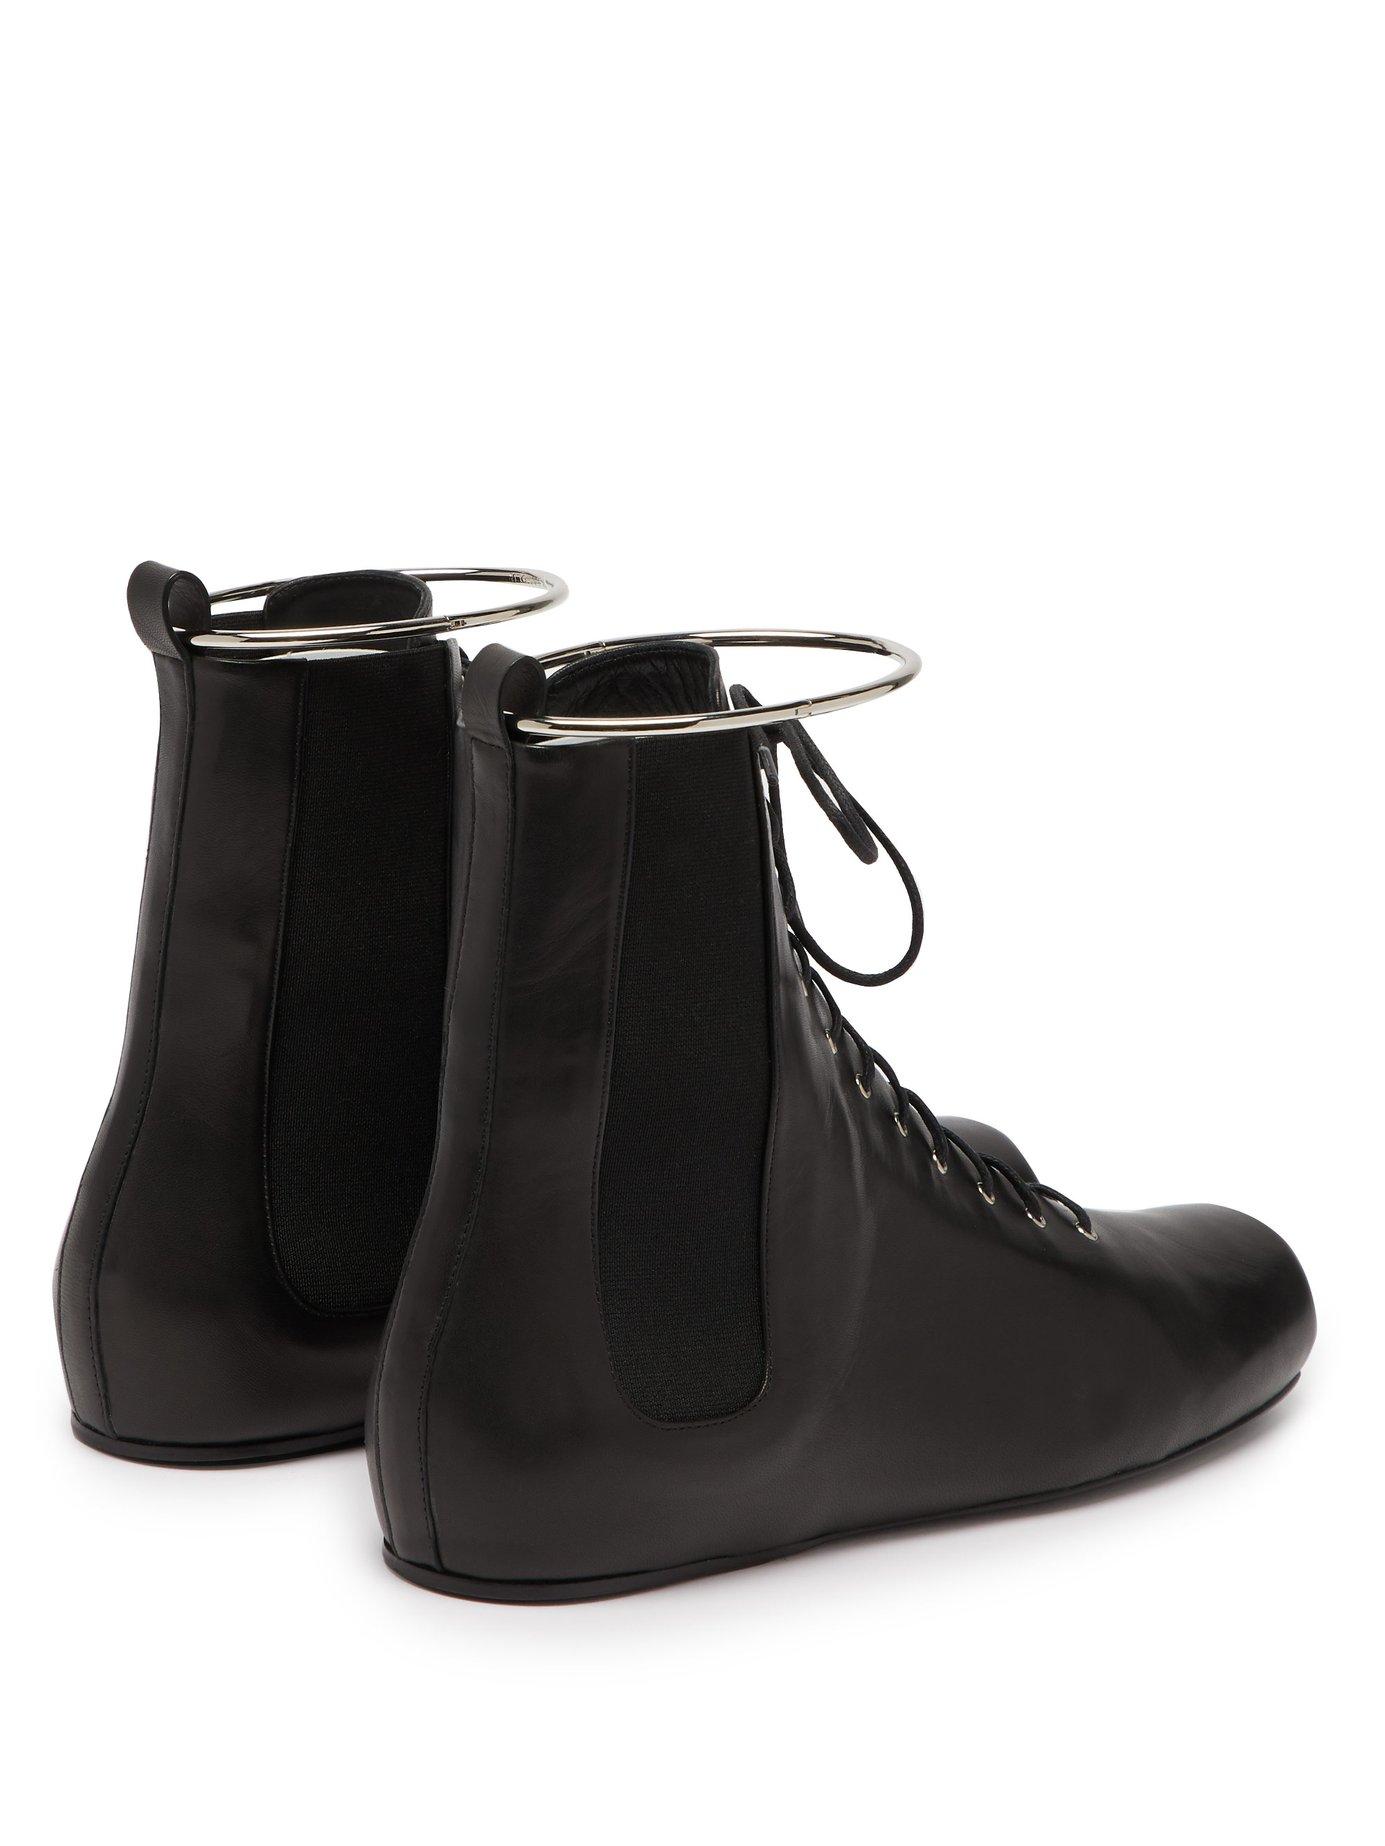 Jil Sander Satin Combat Ring Detail Lace Up Leather Boots in Black - Lyst